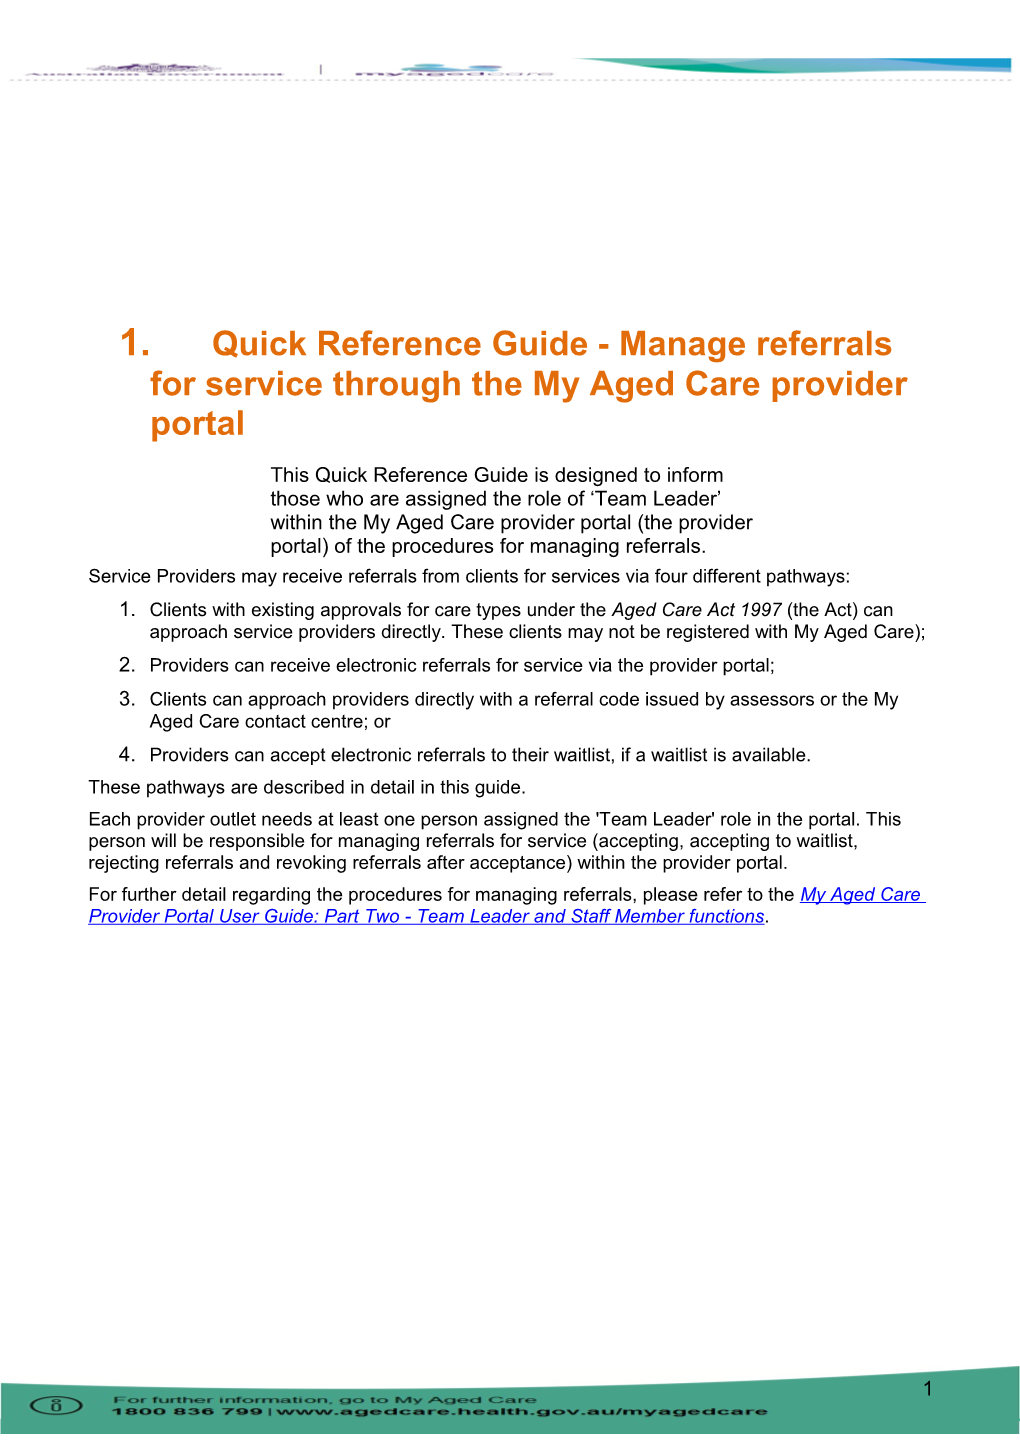 Quick Reference Guide - Manage Referrals for Service Through the My Aged Care Provider Portal